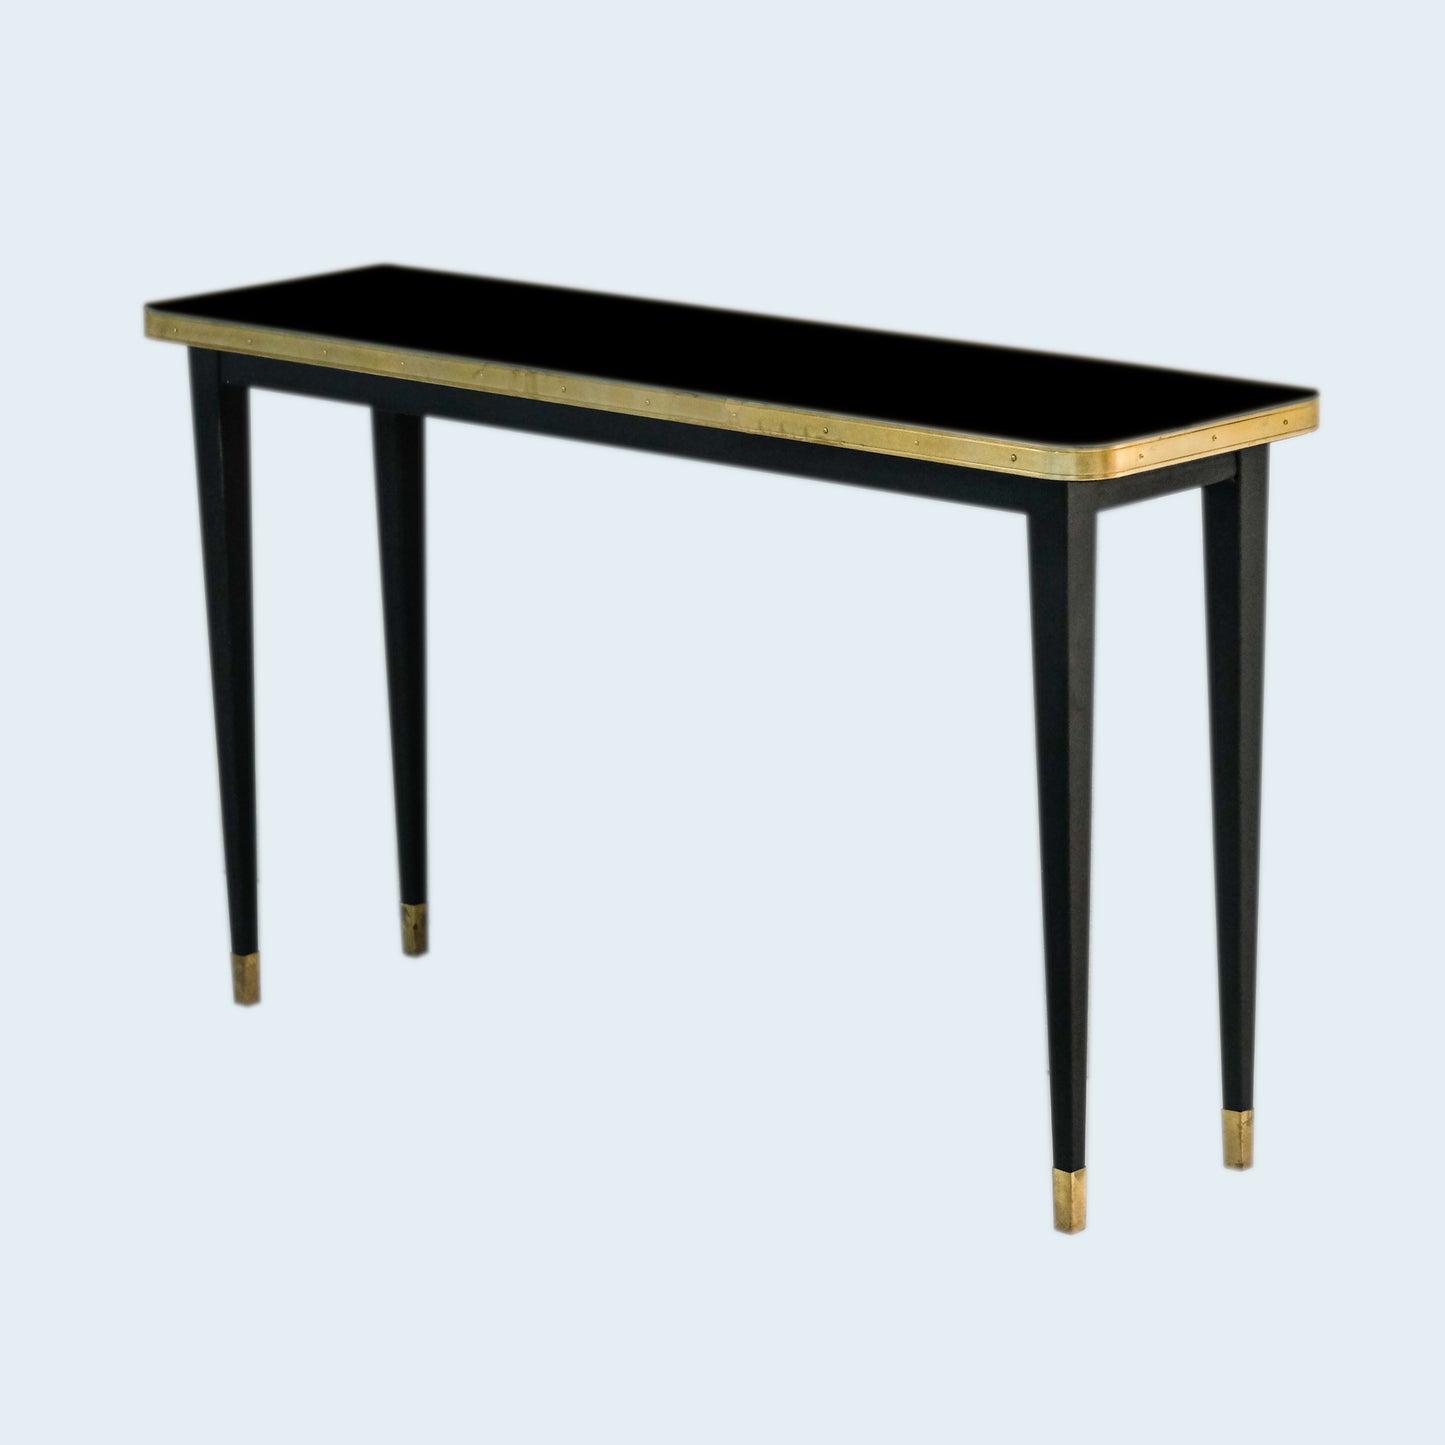 Julieta Vanity Table with Retro 50's Inspired Design, Fully Customizable